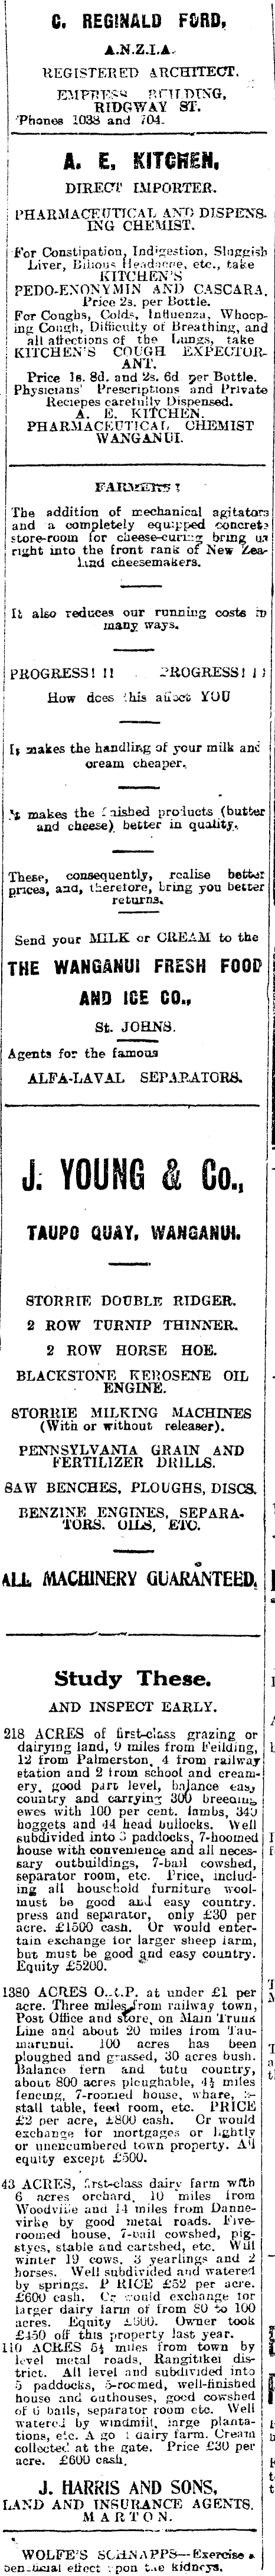 Papers Past Newspapers Wanganui Chronicle 13 February 1918 Page 4 Advertisements Column 2